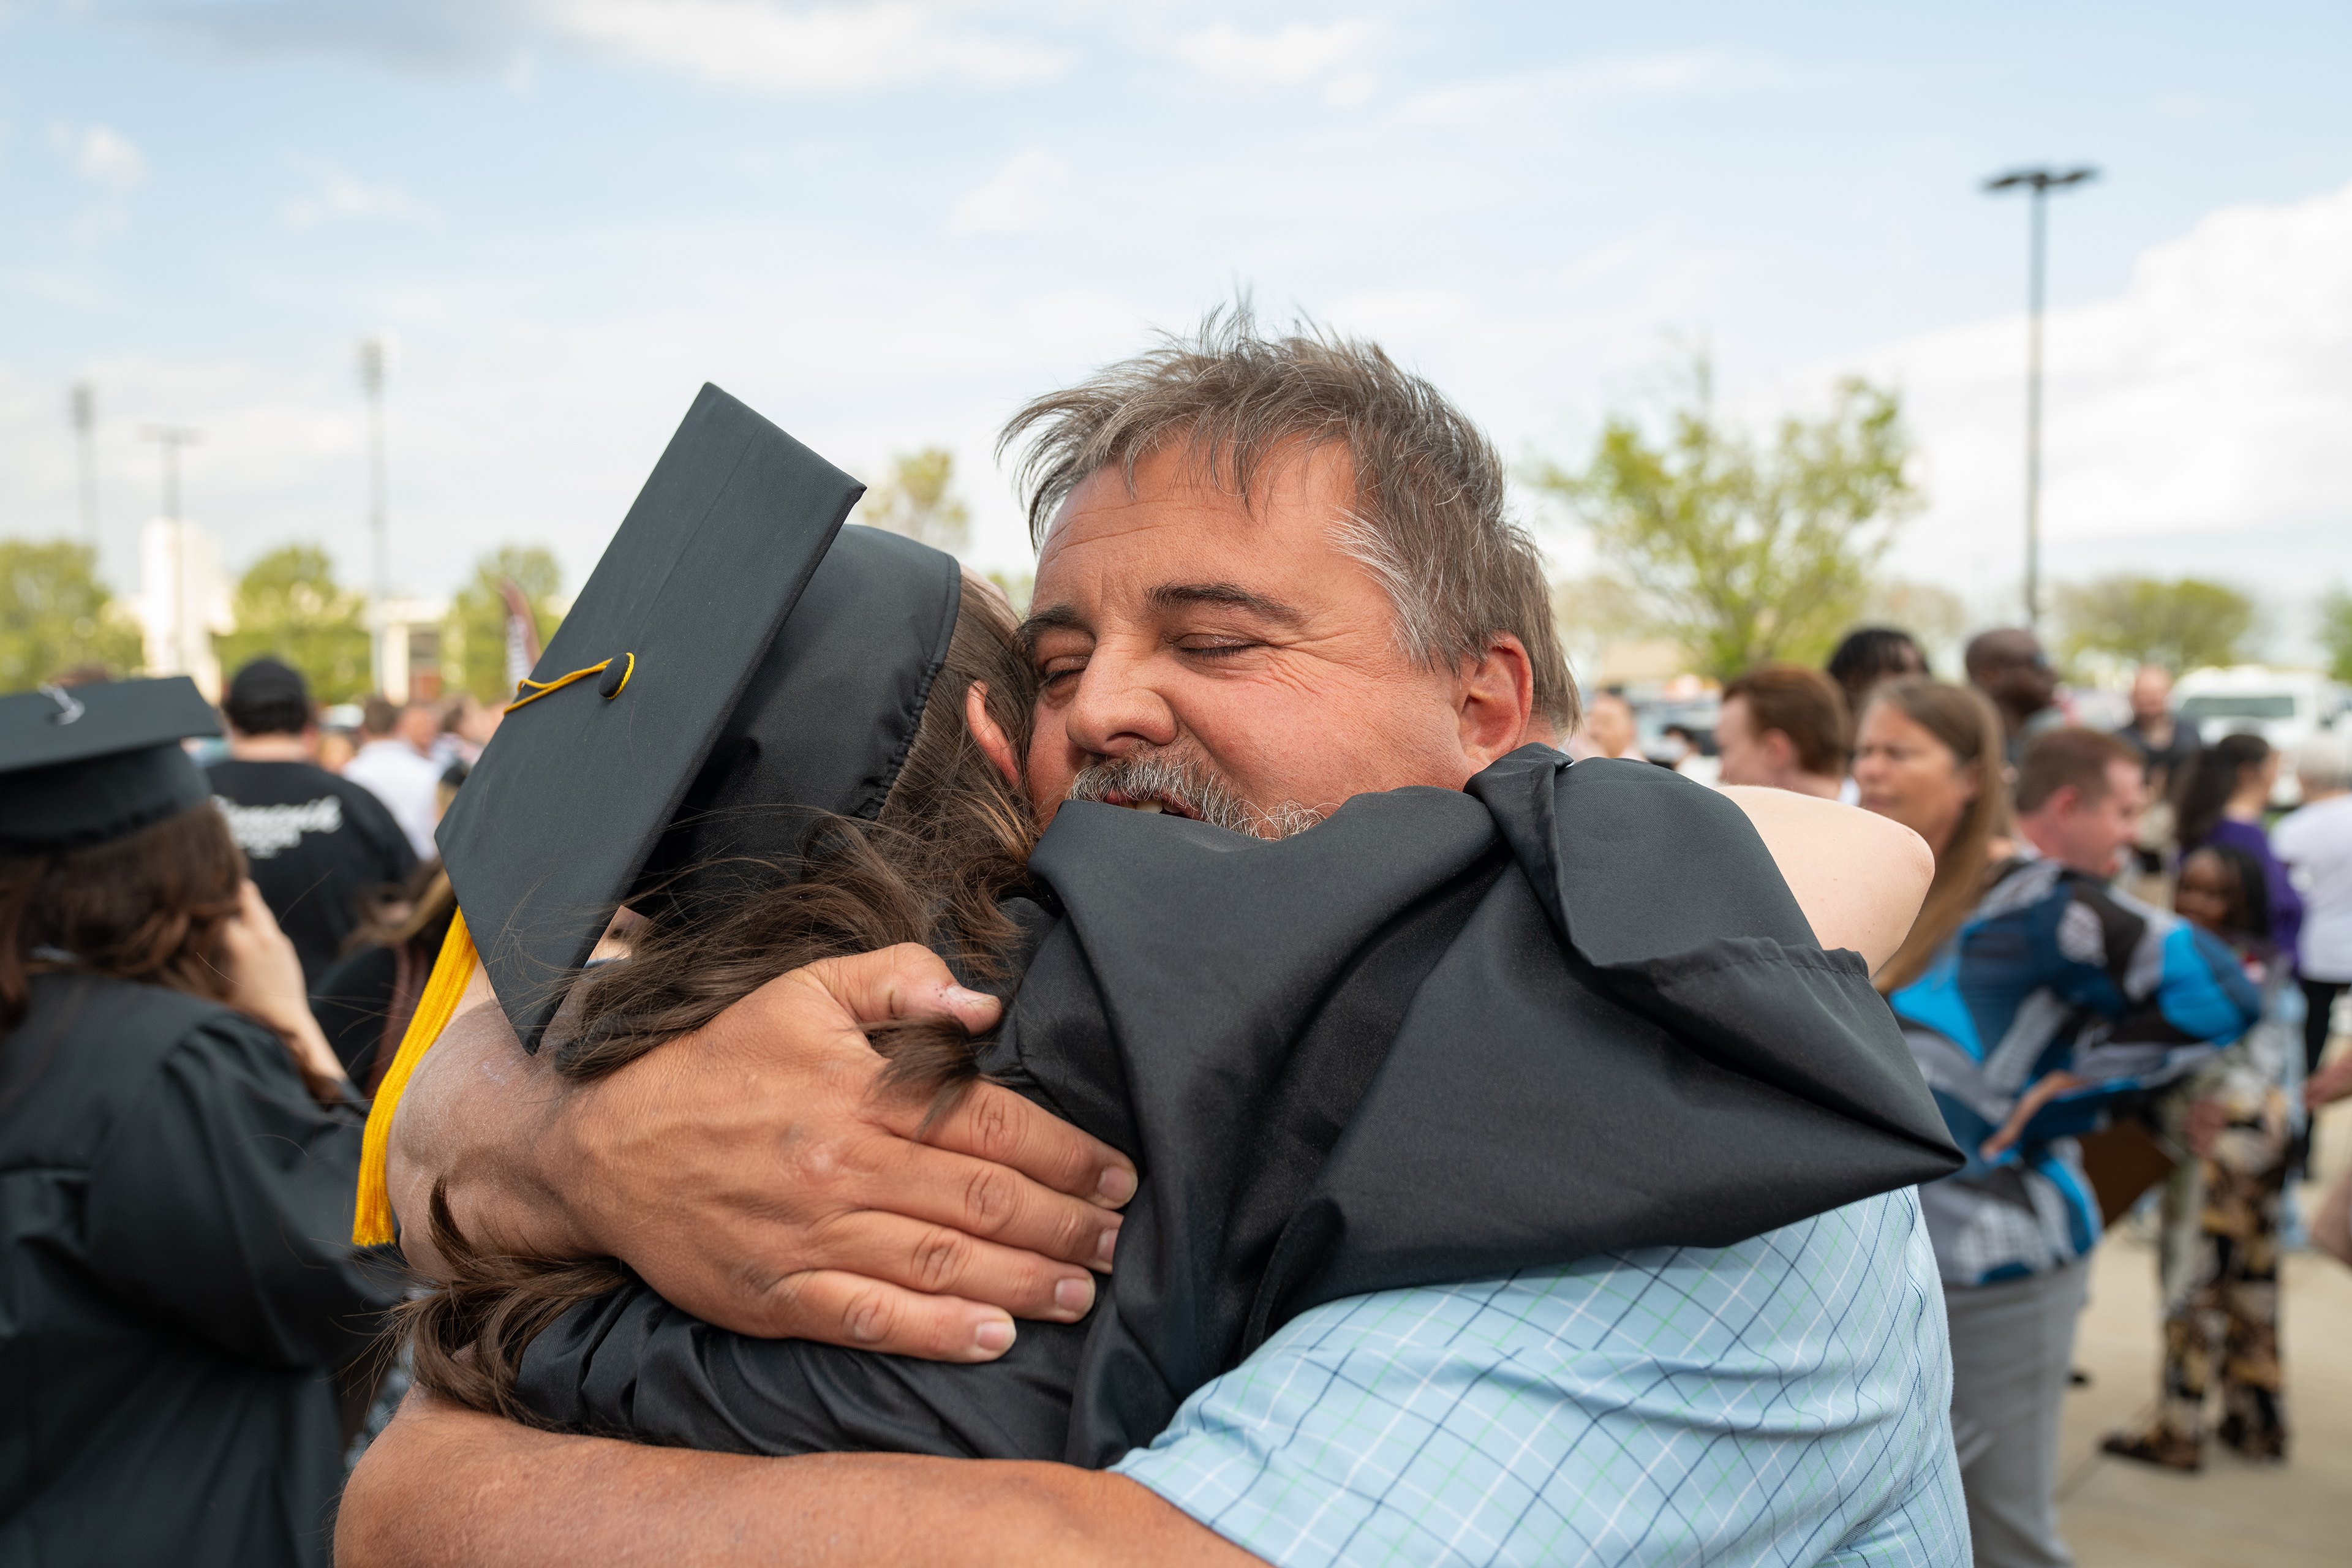 A man hugs a person in a graduation cap and gown